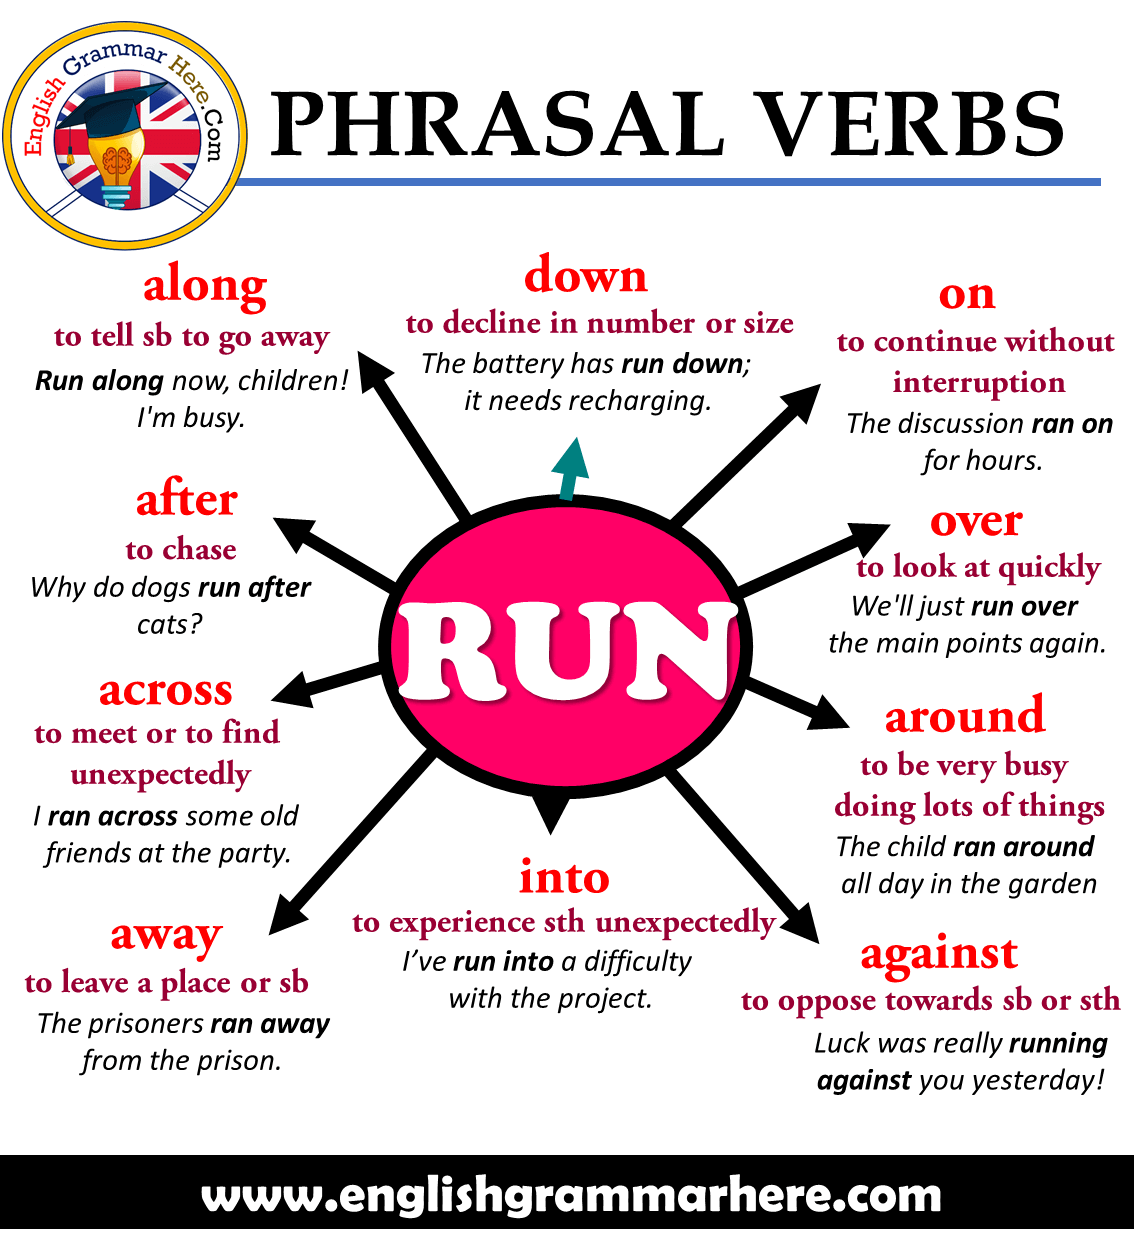 https://englishgrammarhere.com/wp-content/uploads/2019/09/Phrasal-Verbs-%E2%80%93-RUN-Definitions-and-Example-Sentences.png